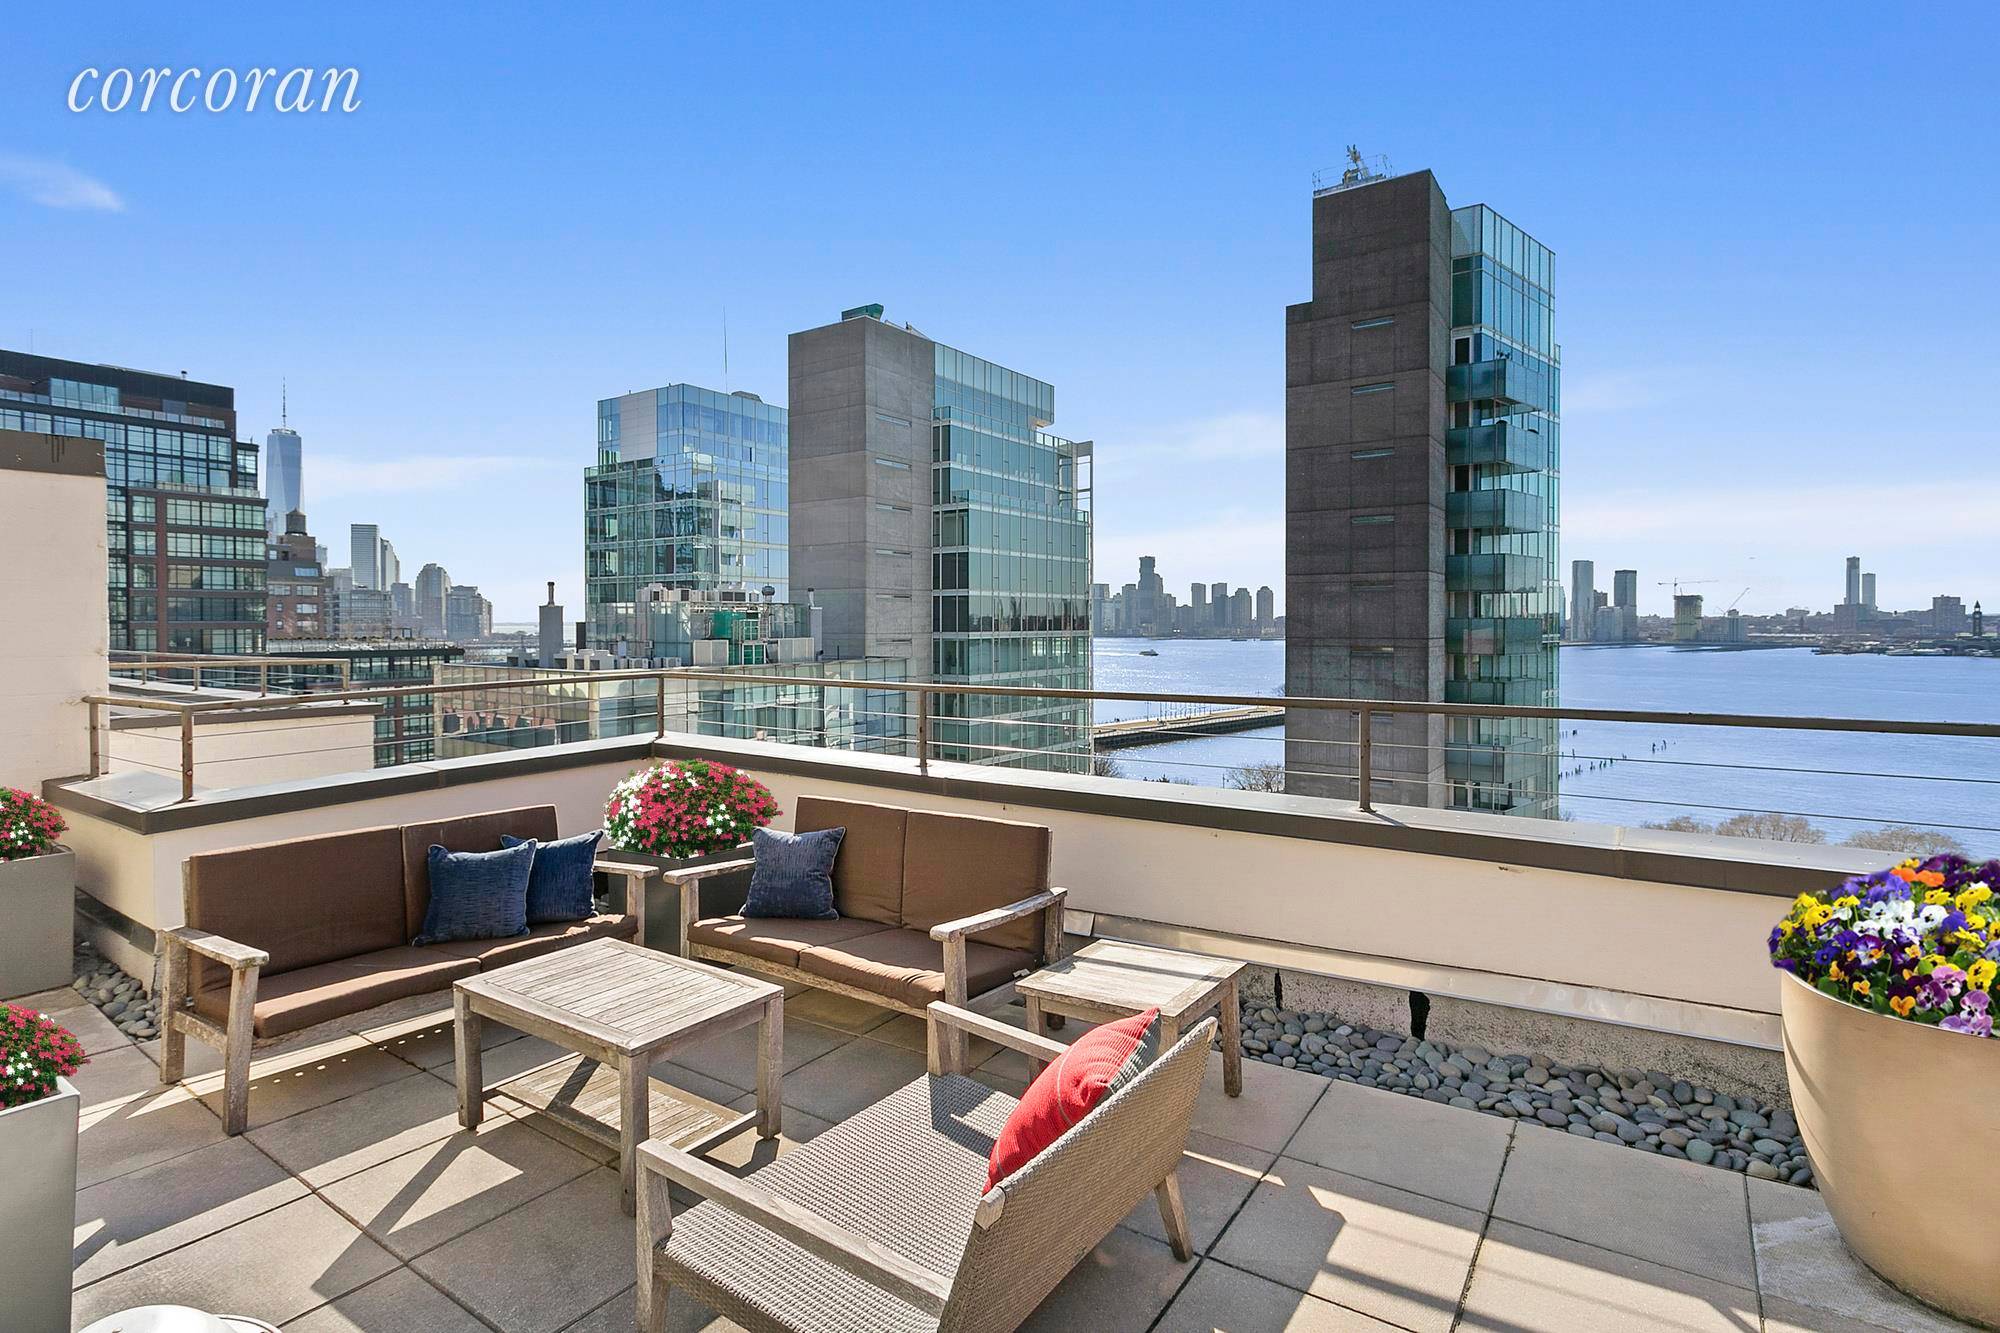 Presenting 155 Perry Street, Penthouse 8B.